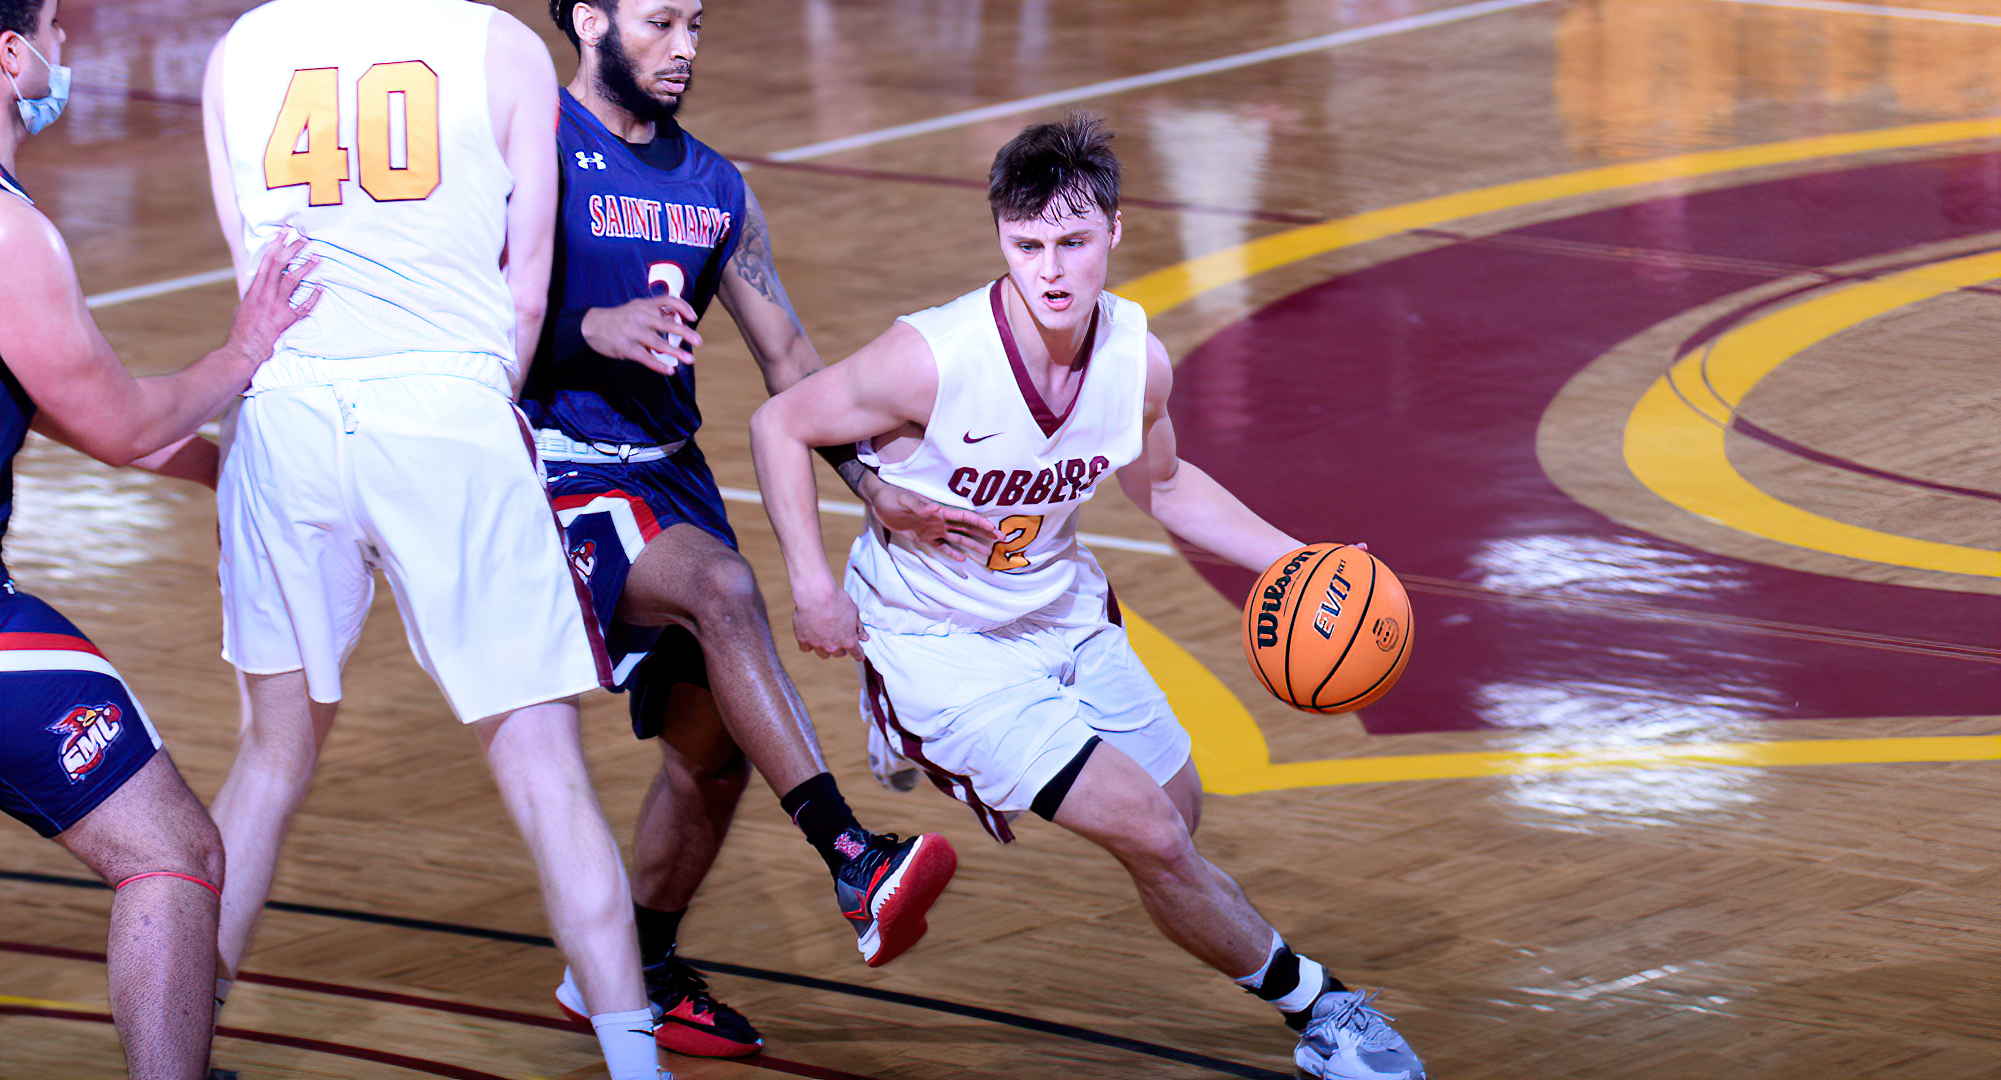 Jackson Jangula drained the game-winning 3-pointer in the waning seconds of play to give the Cobbers a 1-point win at St. Mary's.